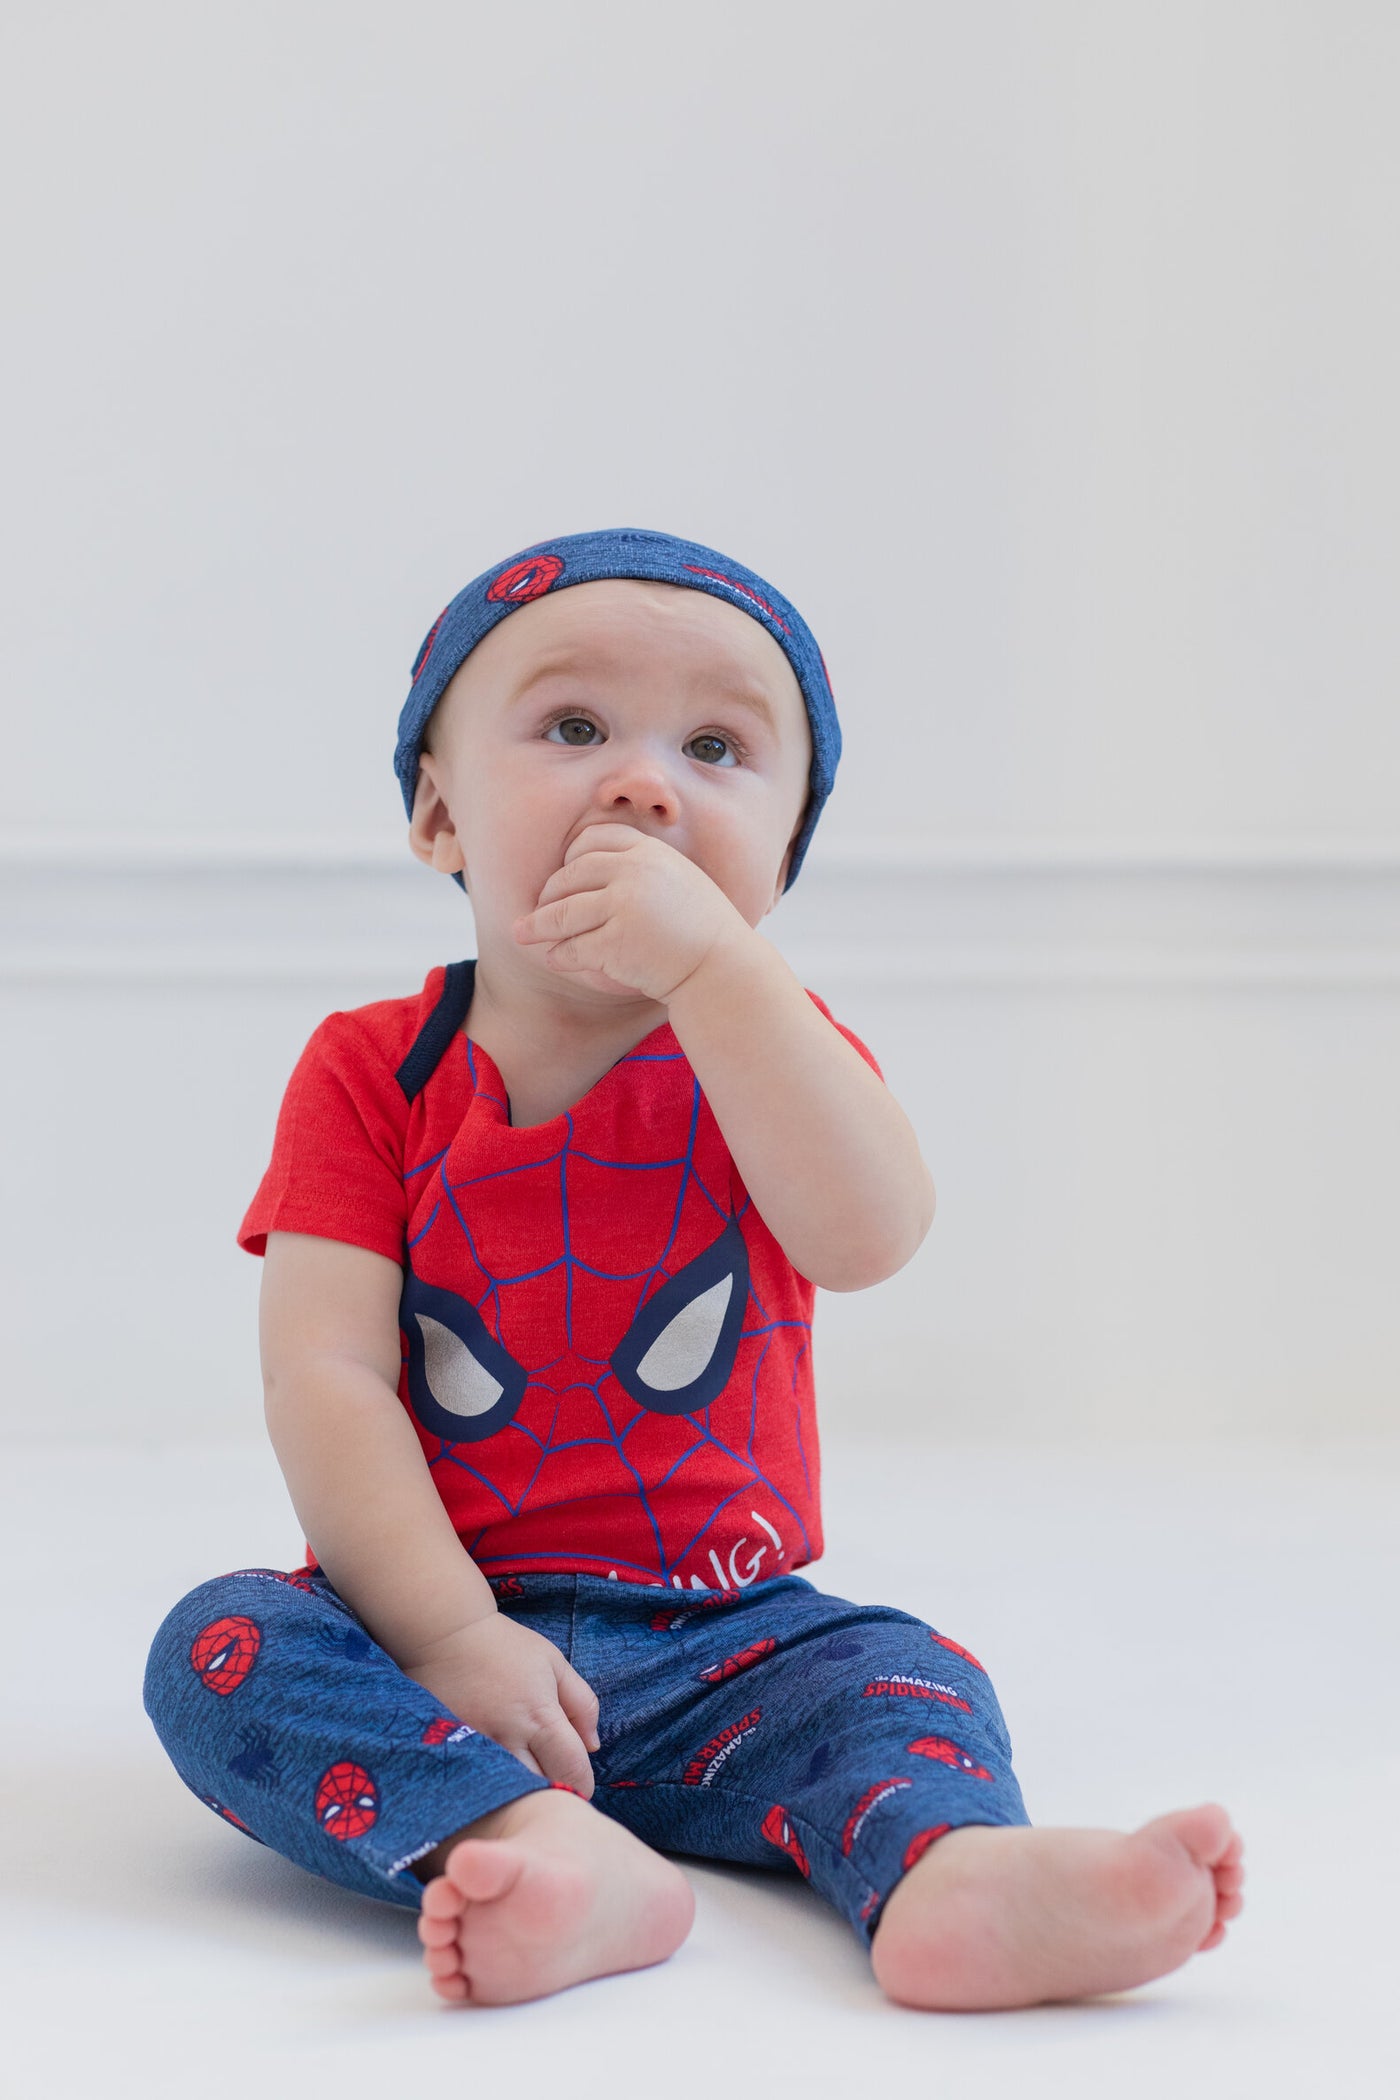 Marvel Avengers Spider-Man Bodysuit Pants and Hat 3 Piece Outfit Set